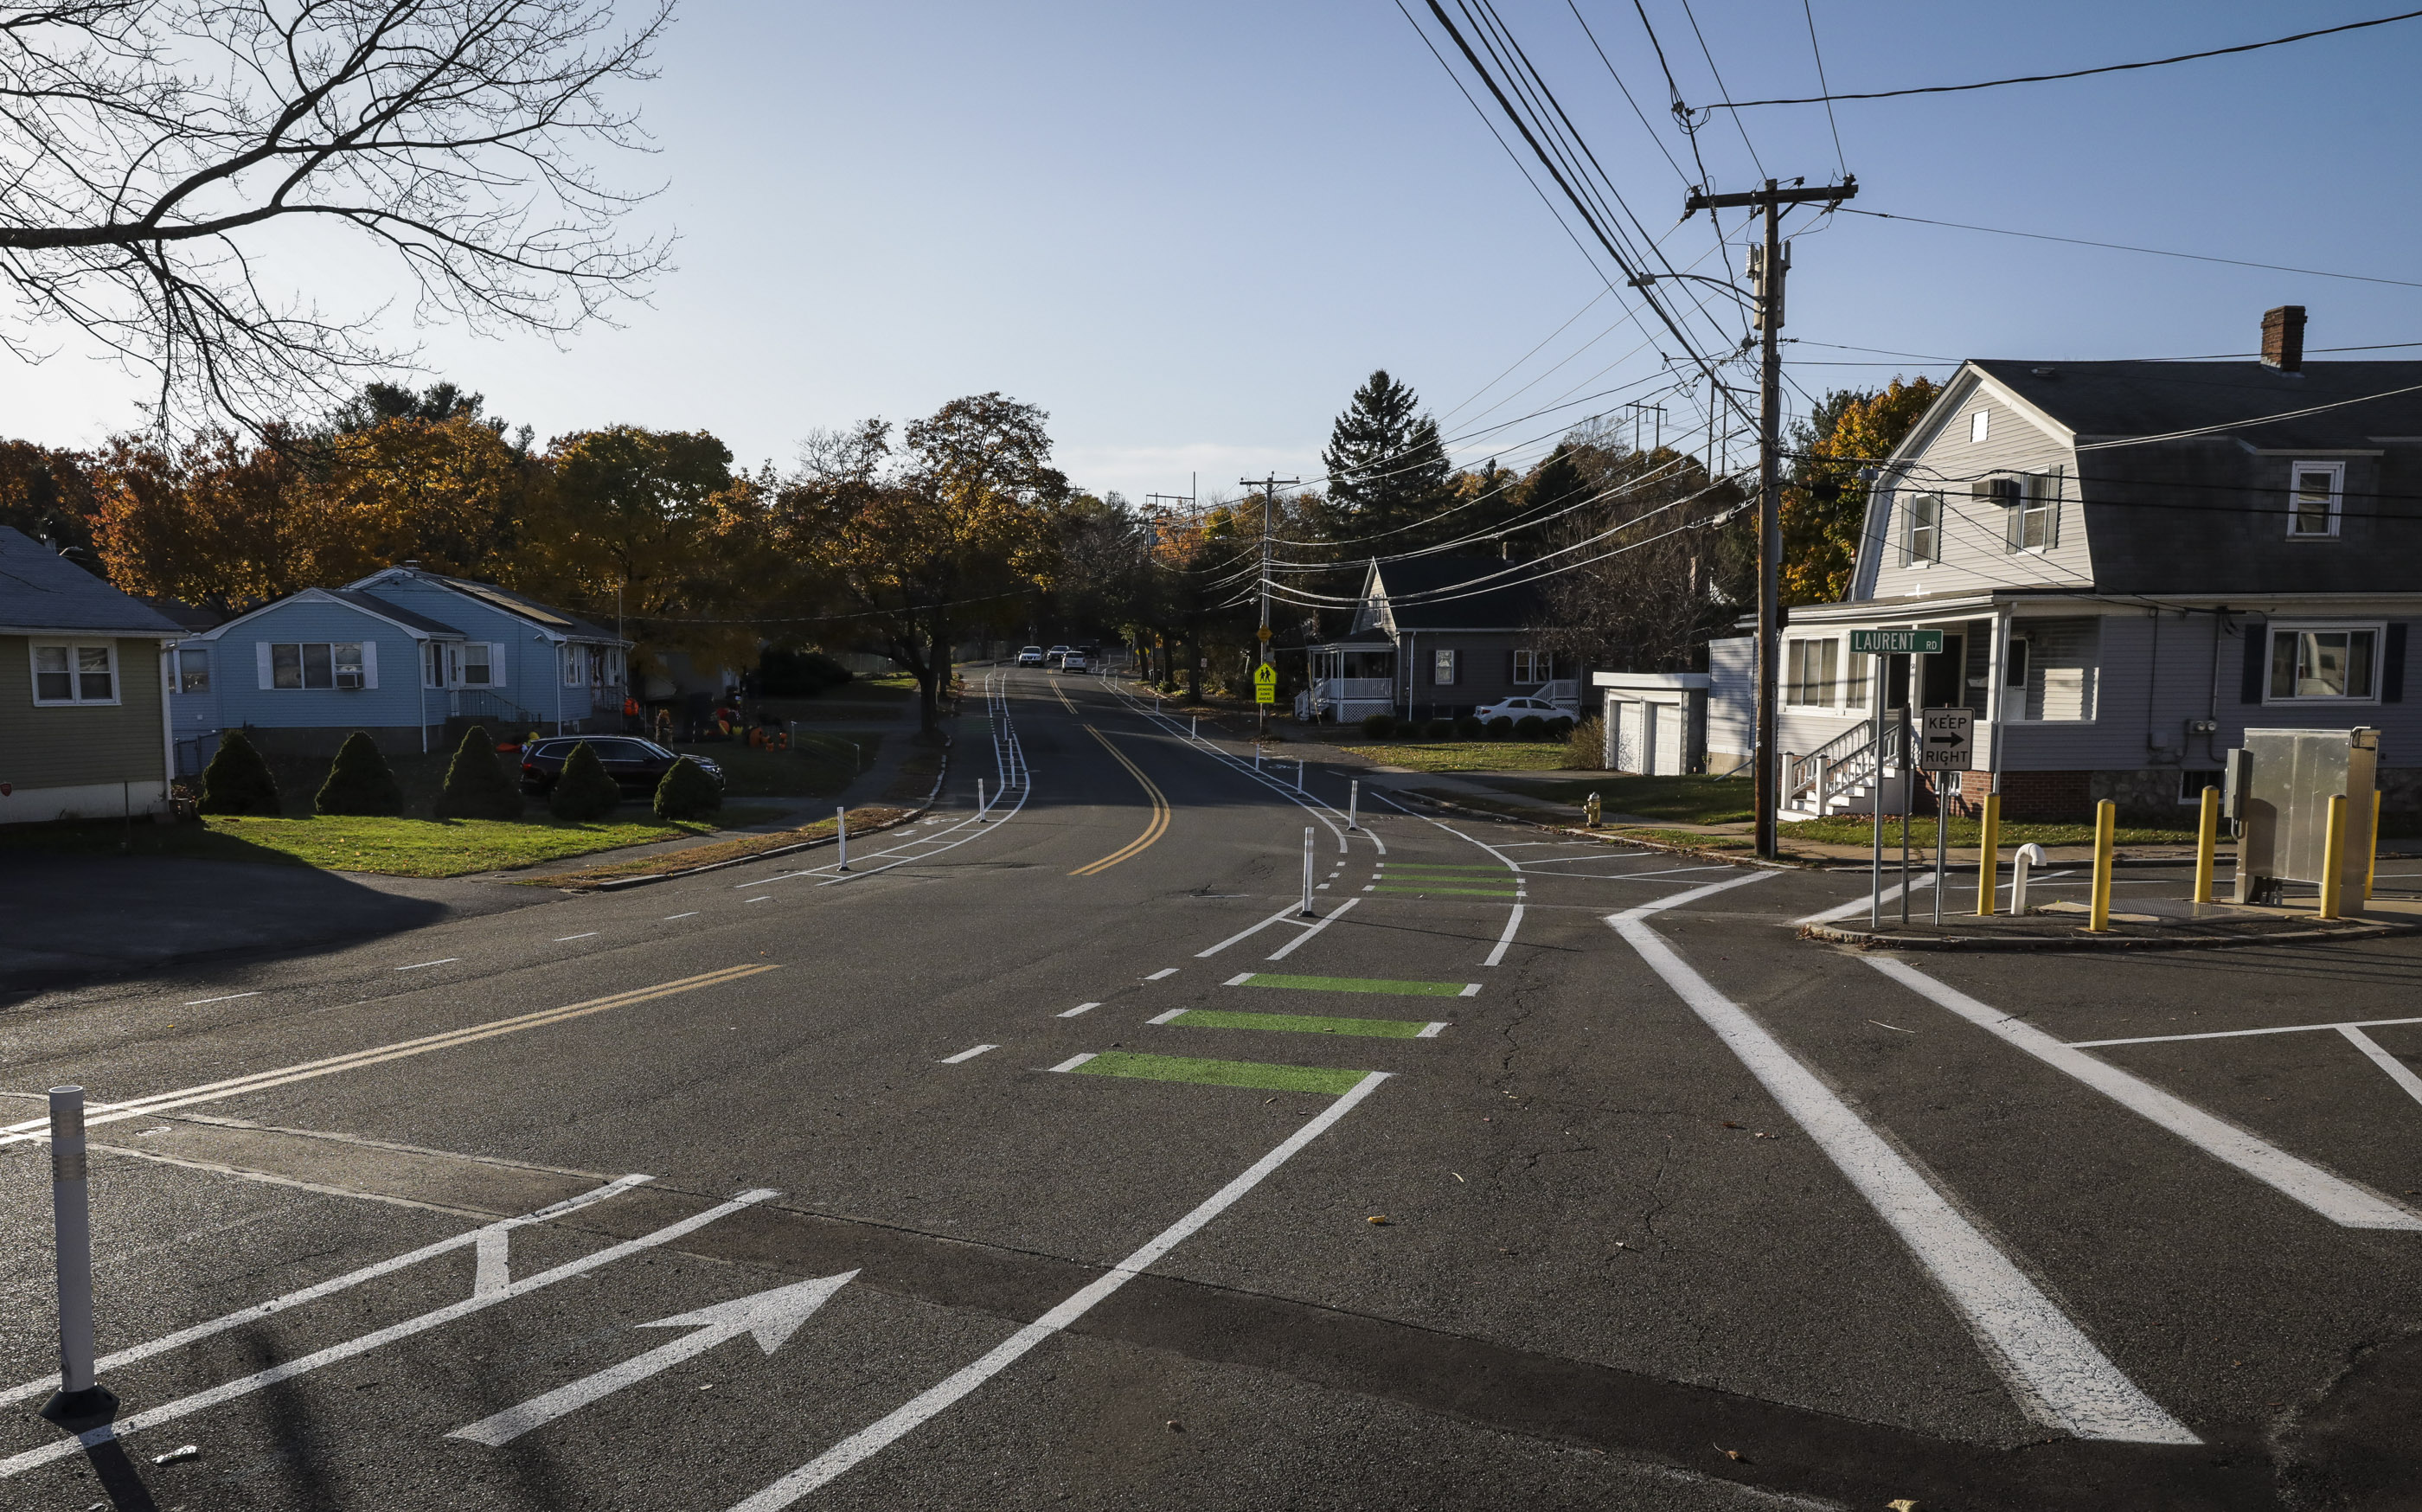 Before photo example for Willson St. in Salem - shows road conditions with a divided road and no bike lane